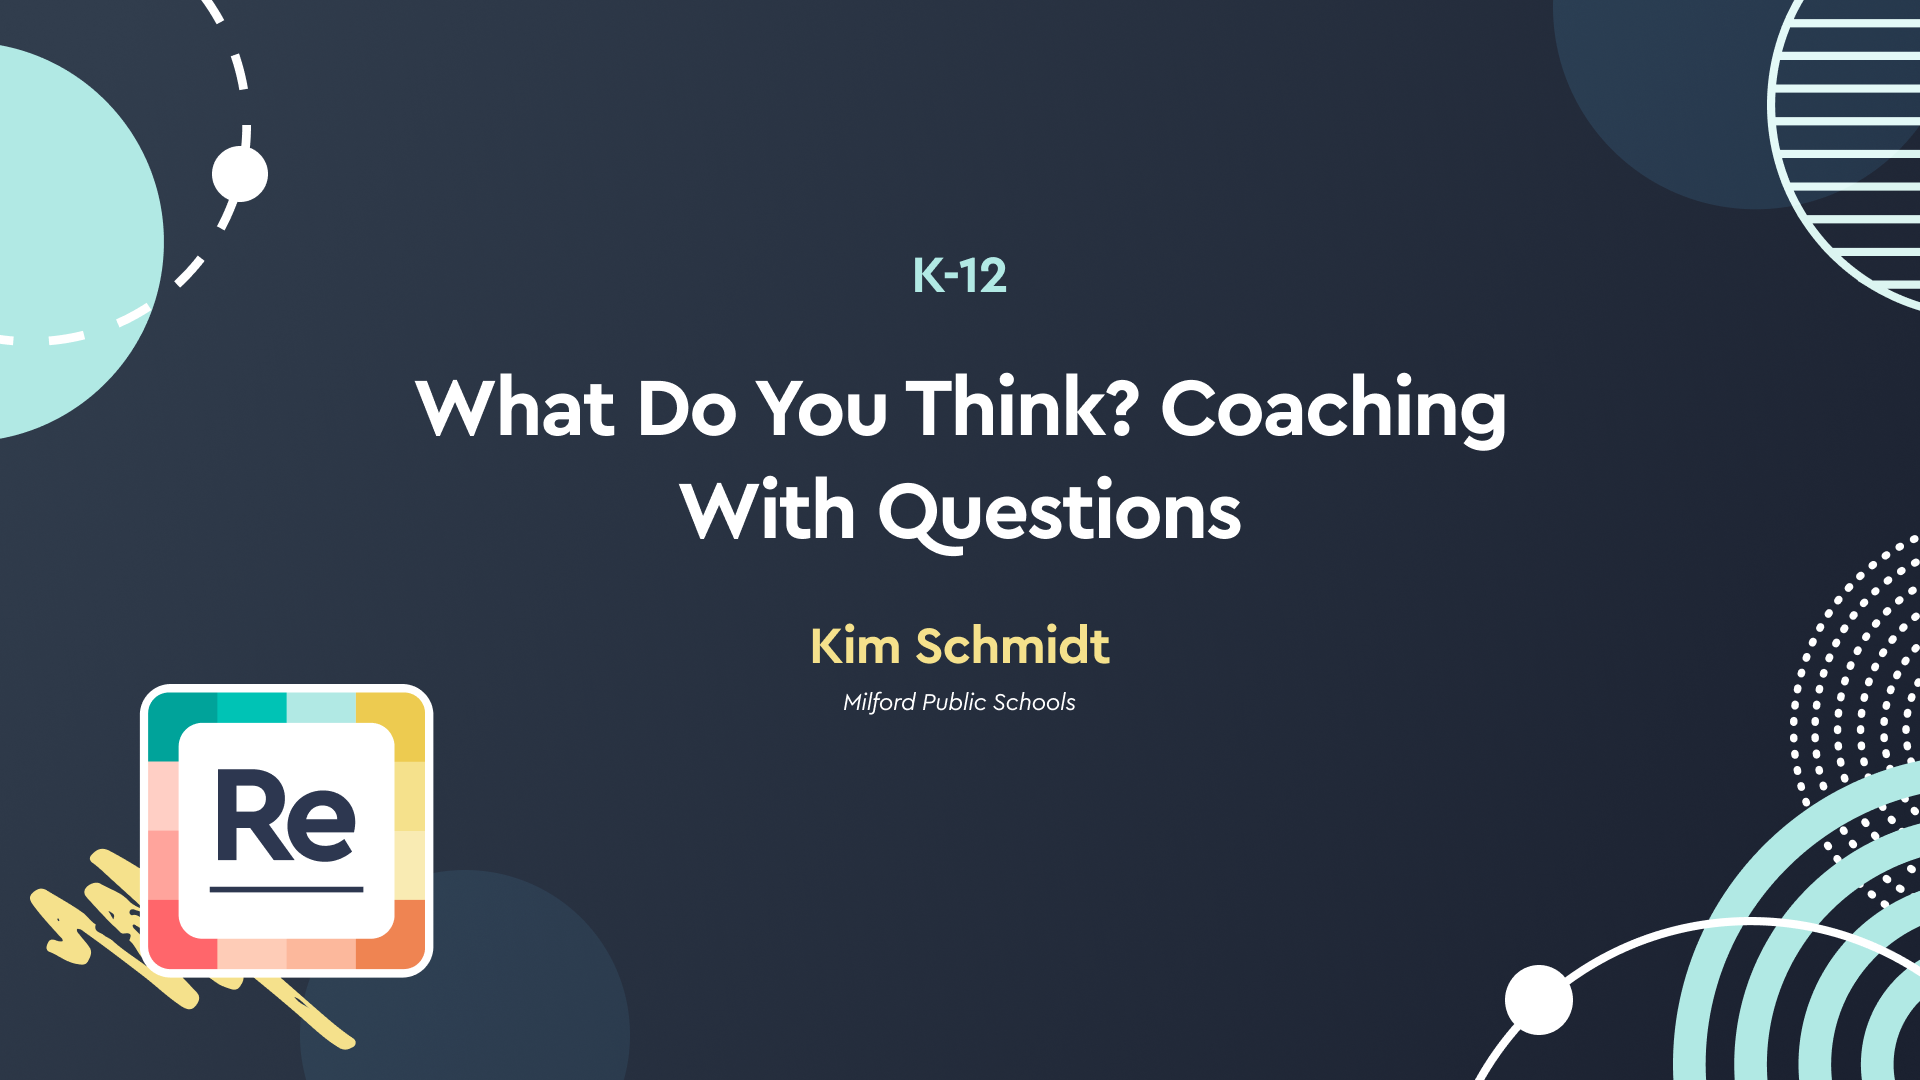 What Do You Think? Coaching With Questions